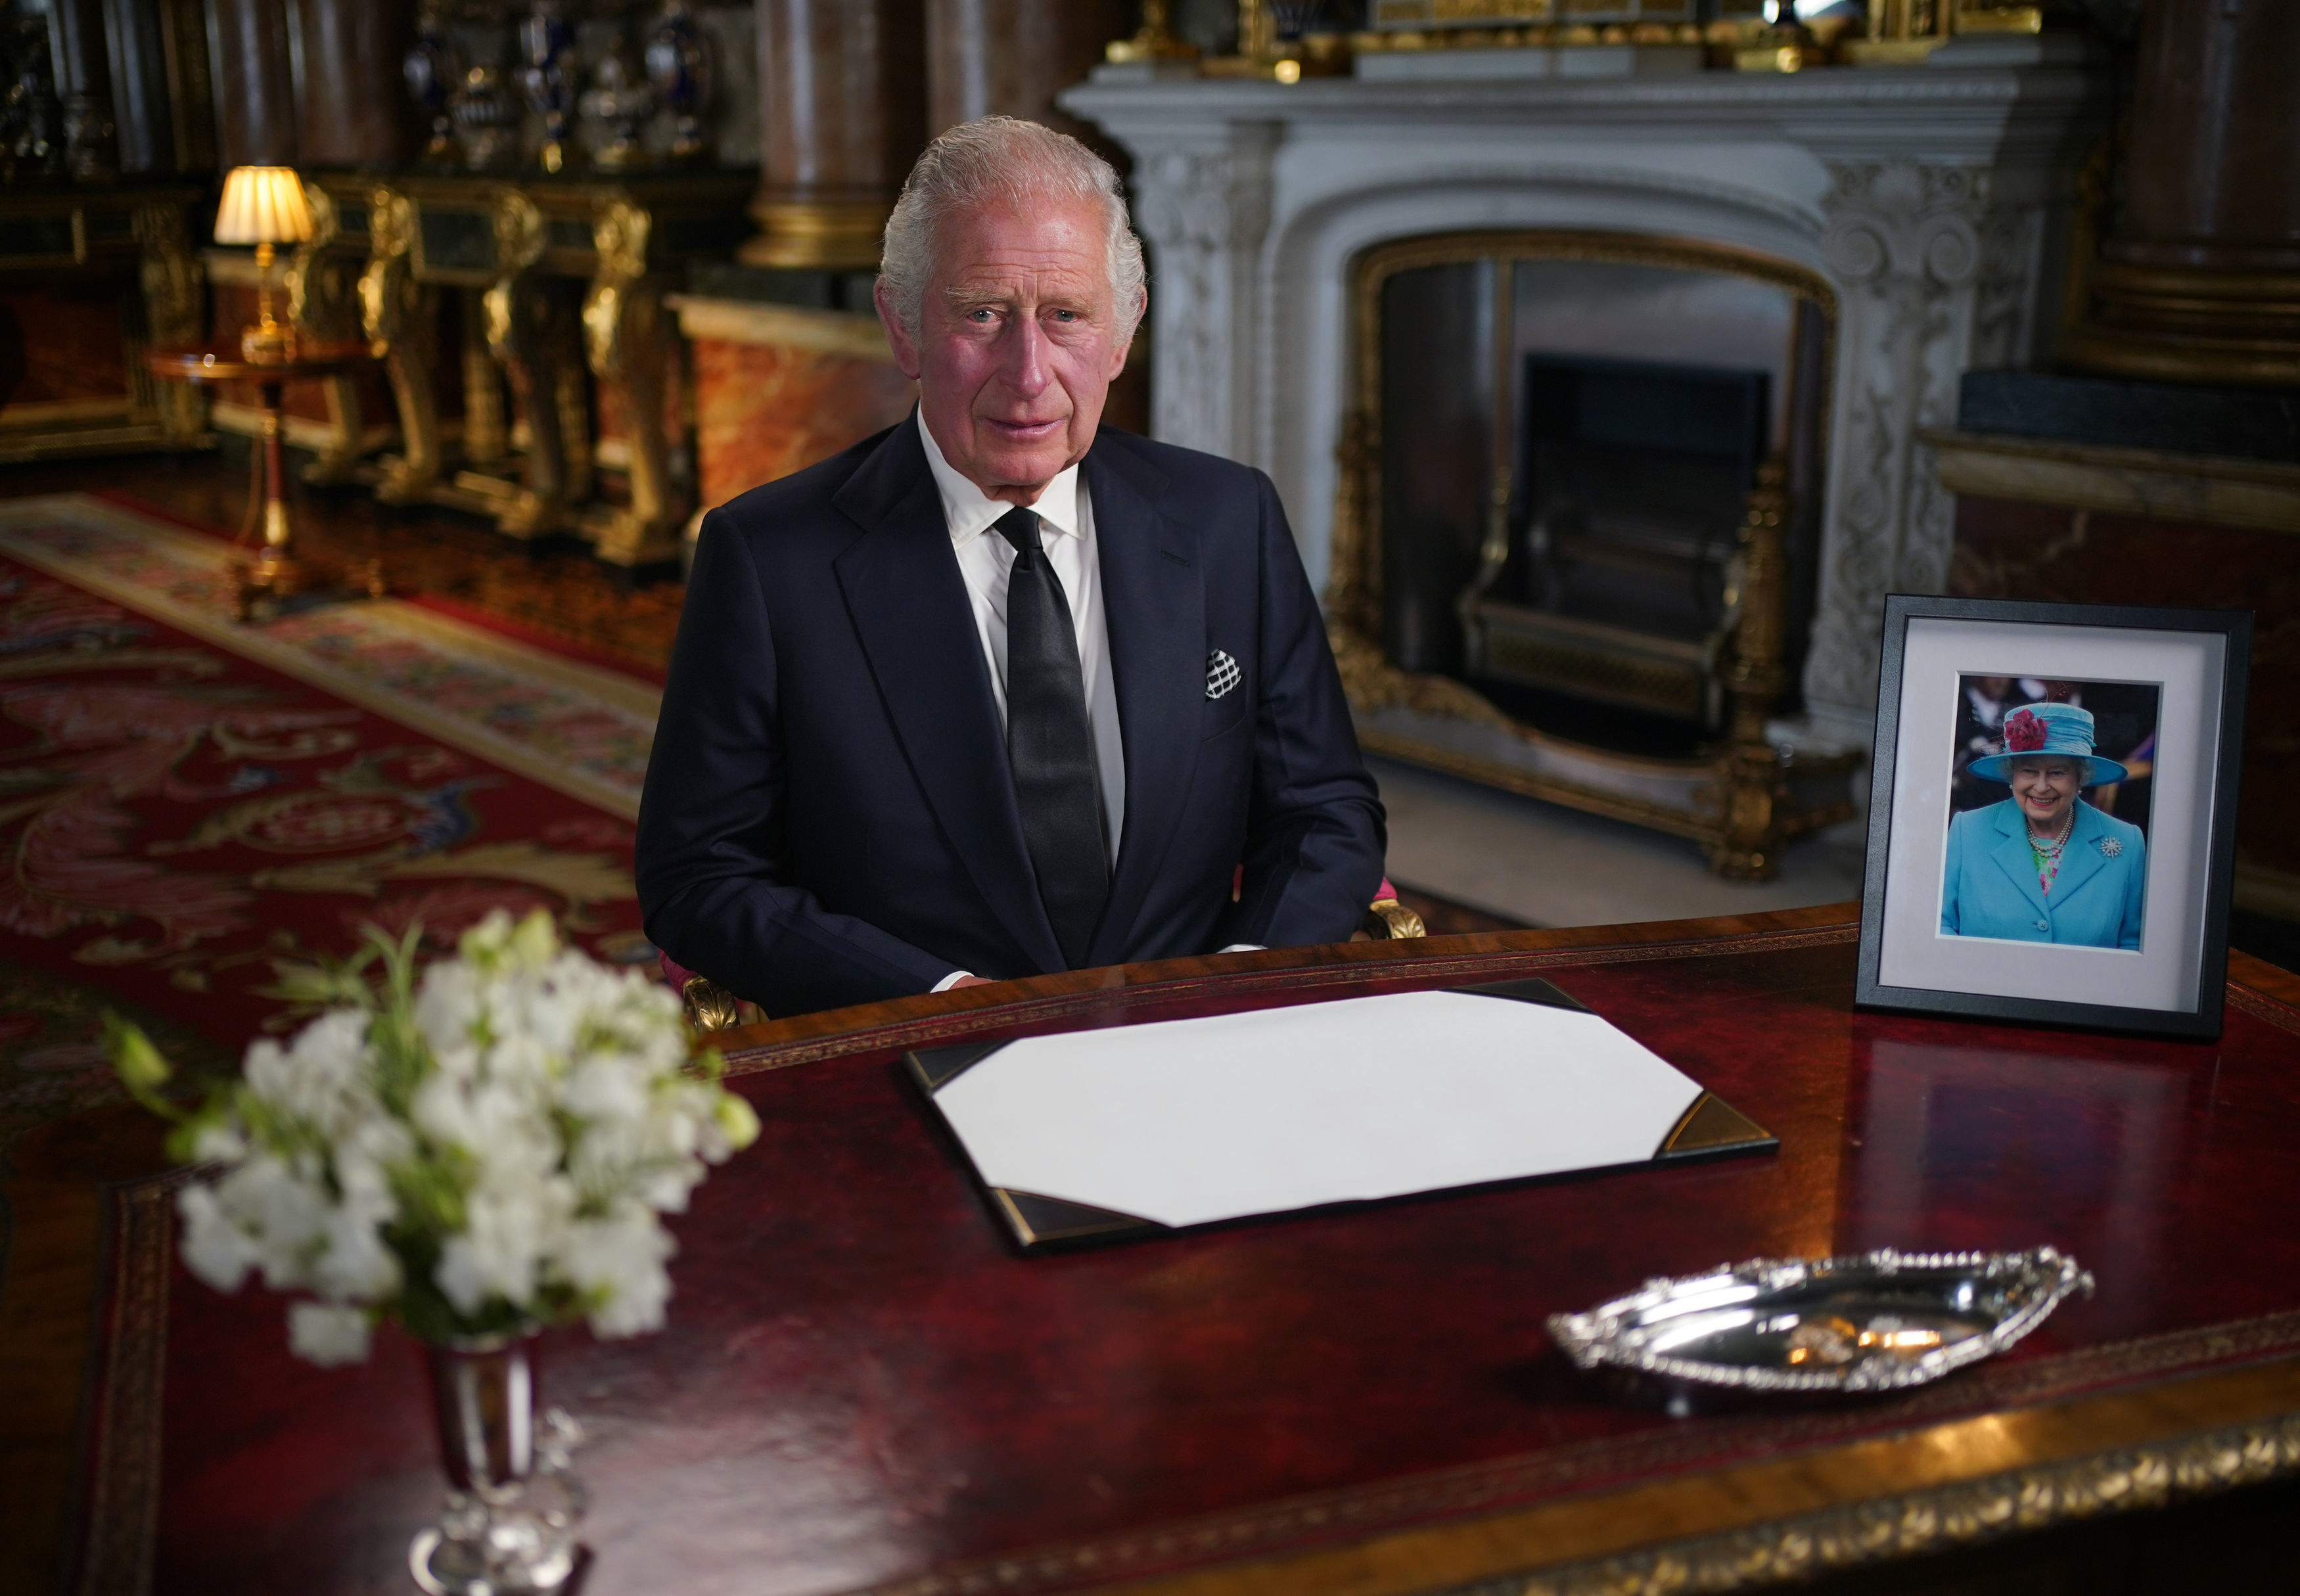 <p>King Charles III delivered his first address to the nation and the Commonwealth from the blue drawing room at Buckingham Palace in London on Sept. 9, 2022, one day after <a href="https://www.wonderwall.com/celebrity/celebrities-dignitaries-react-to-death-of-queen-elizabeth-ii-647756.gallery">the death of his mother</a>, Queen Elizabeth II. In his speech, he shared his "deep sense of gratitude for the more than 70 years" she served on the throne and paid tribute to her "life of service," pledging to "endeavour to serve you with loyalty, respect, and love" as she did for more than 70 years. He also spoke directly to his "darling Mama," saying, "Thank you. May flights of angels sing thee to thy rest." Charles also confirmed that his "darling wife" Camilla had become his Queen Consort, and announced that eldest son and heir <a href="https://www.wonderwall.com/celebrity/profiles/overview/prince-william-482.article">Prince William</a> <a href="https://www.wonderwall.com/celebrity/royals-line-british-throne-order-succession-3012158.gallery?photoId=648489">now holds Charles's previous titles including Duke of Cornwall and Prince of Wales</a>, making daughter-in-law Kate Middleton the new Princess of Wales -- the first woman to hold the title since his first wife, the late Princess Diana. Despite their fractured relationship, Charles also mentioned his younger son and his wife, telling his subjects, "I want also to express my love for Harry and Meghan as they continue to build their lives overseas."</p>